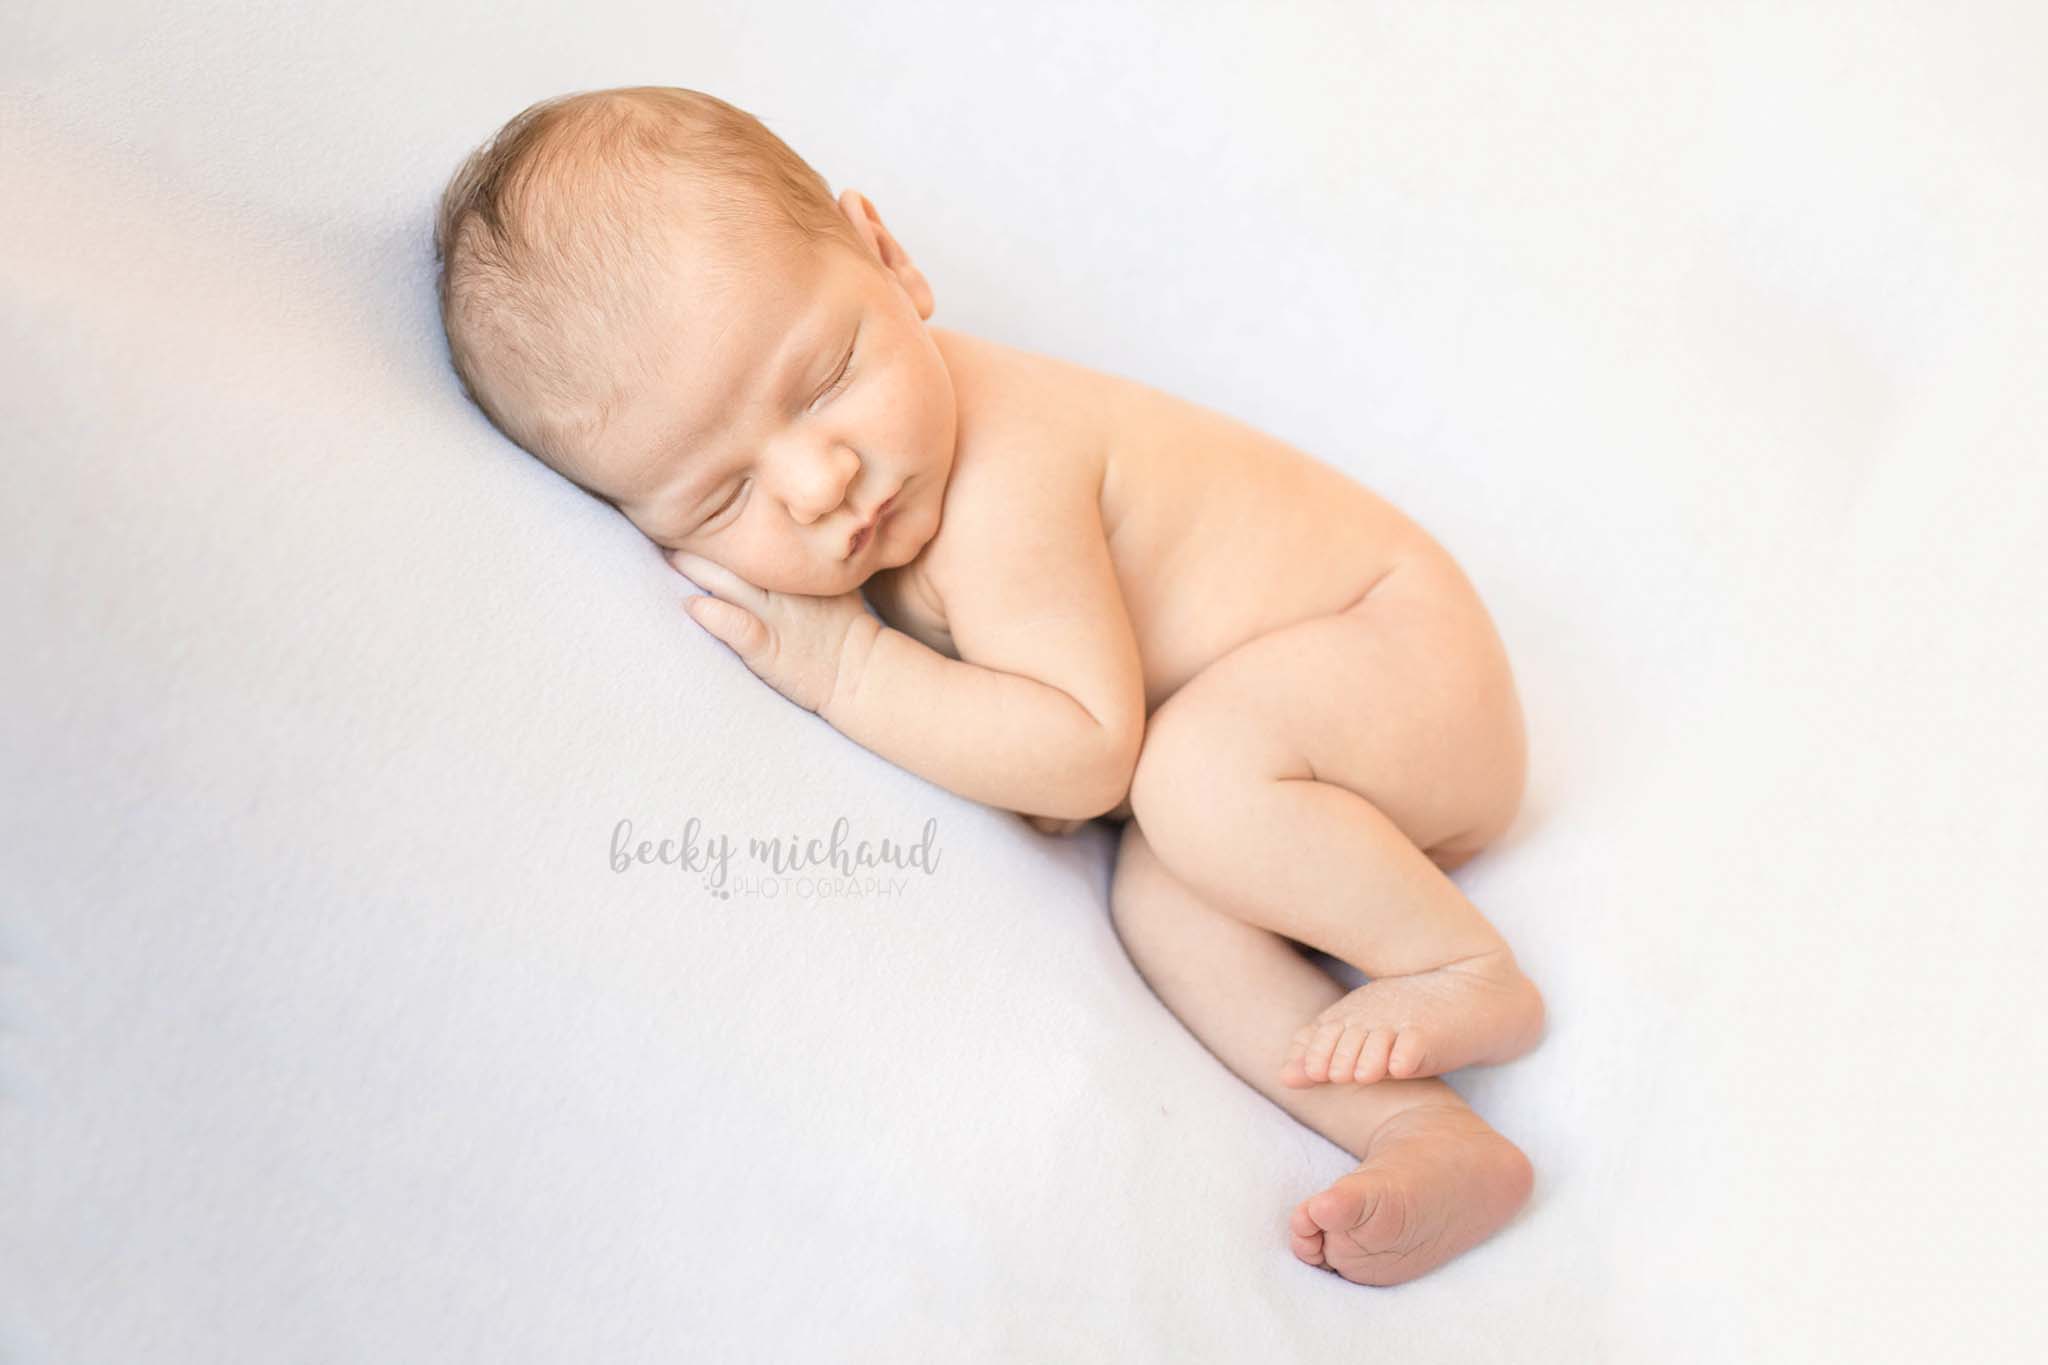 simple photo of a newborn baby lying on his side on a white blanket